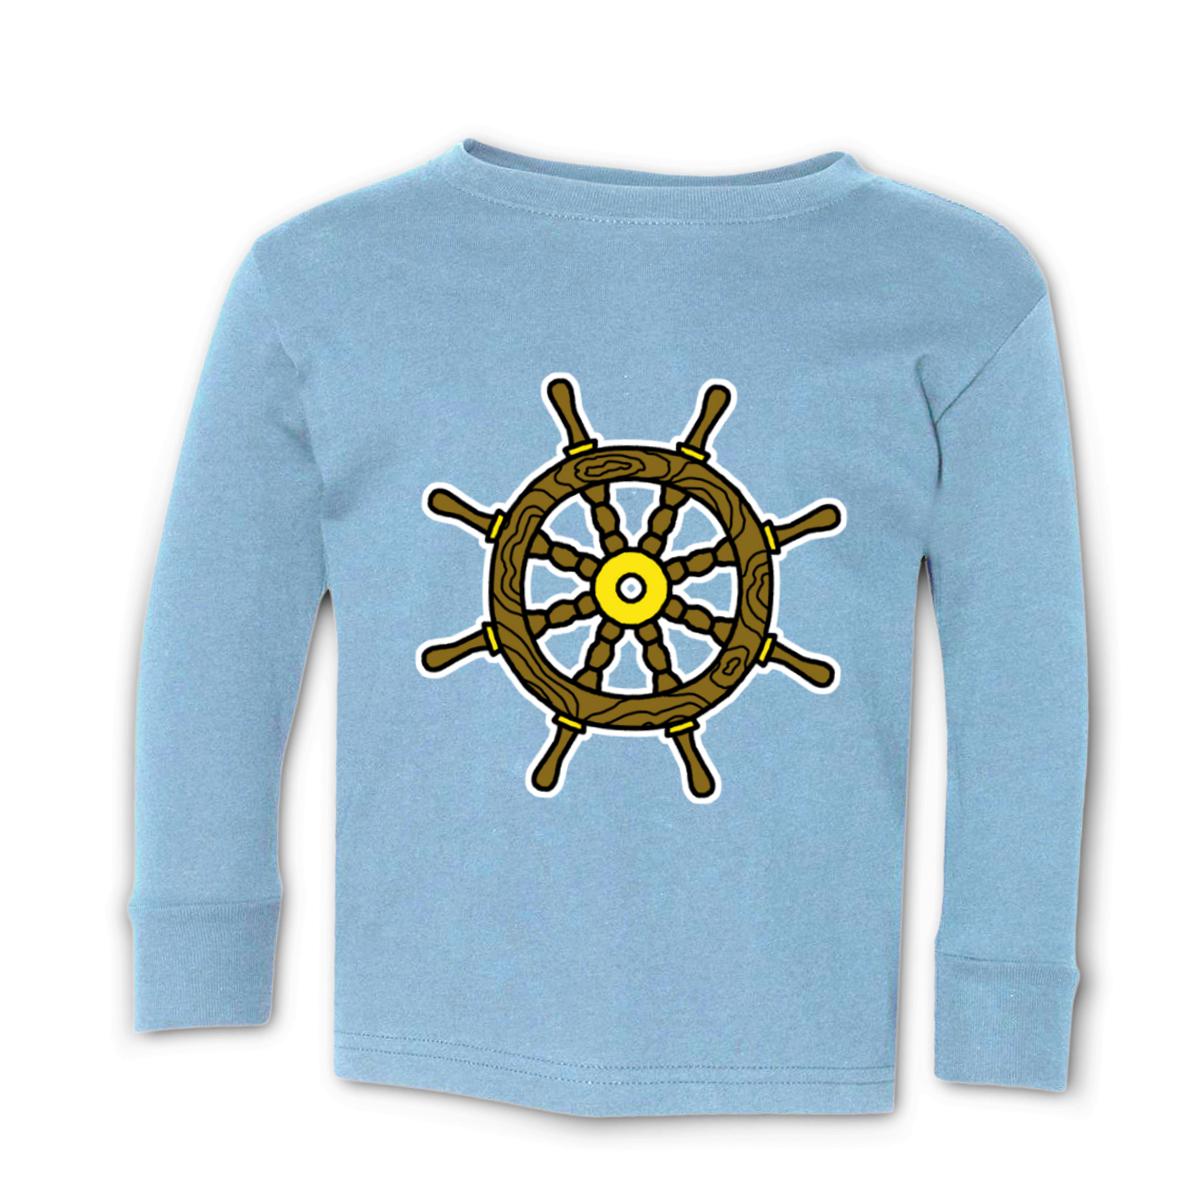 American Traditional Ship Wheel Toddler Long Sleeve Tee 2T light-blue